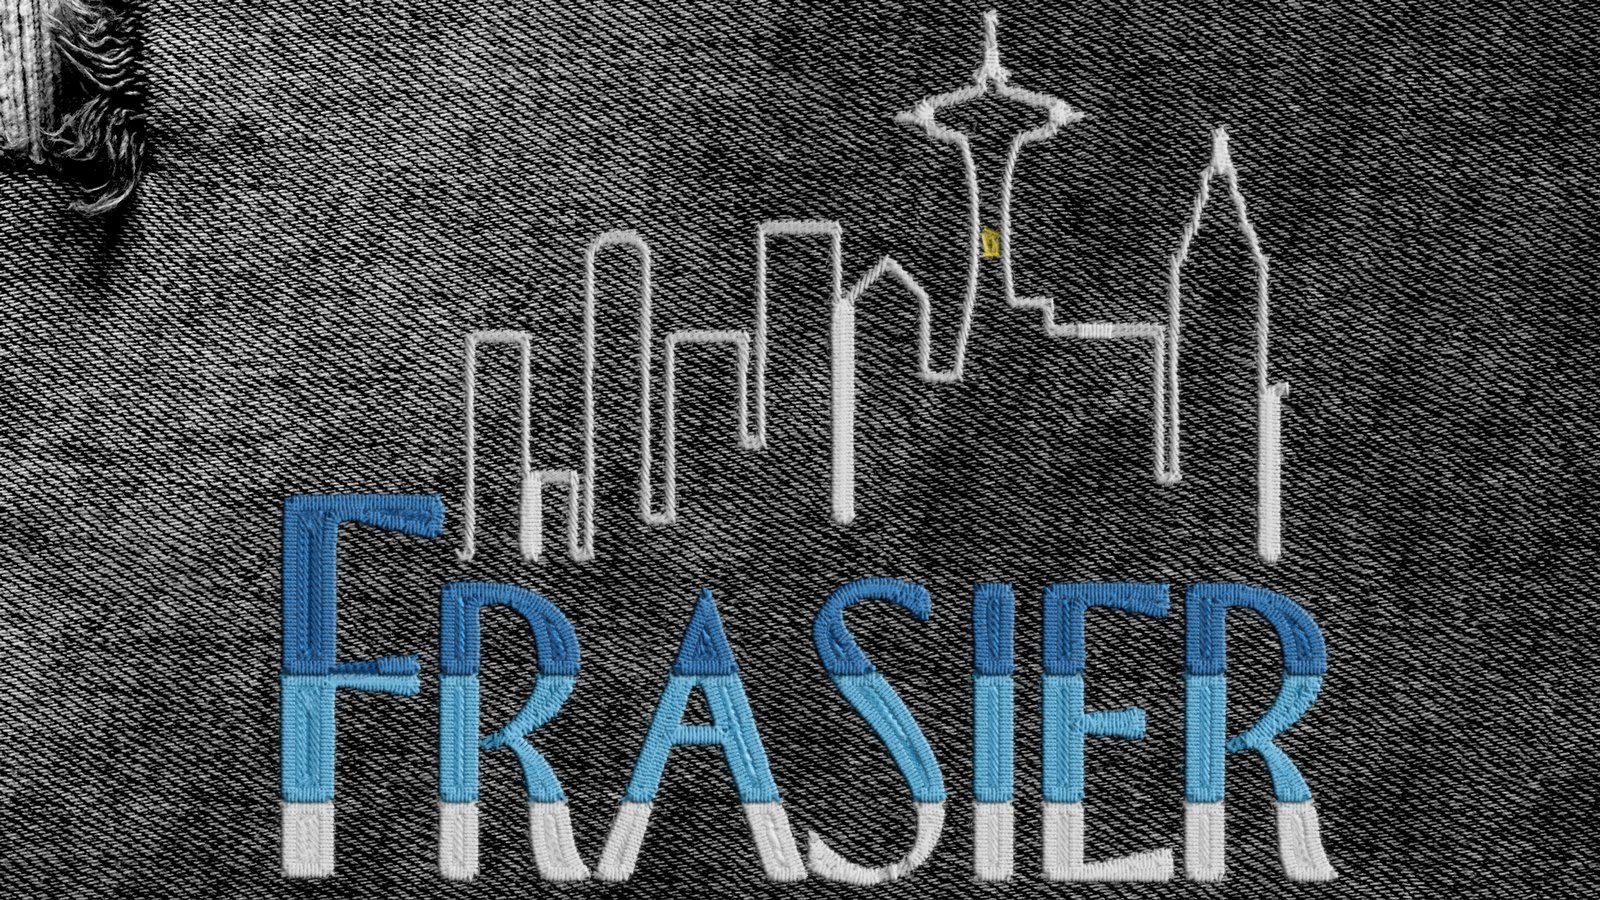 ANIMATED OUR FRASIER REMAKE TO PREMIERE AHEAD OF OFFICIAL REBOOT